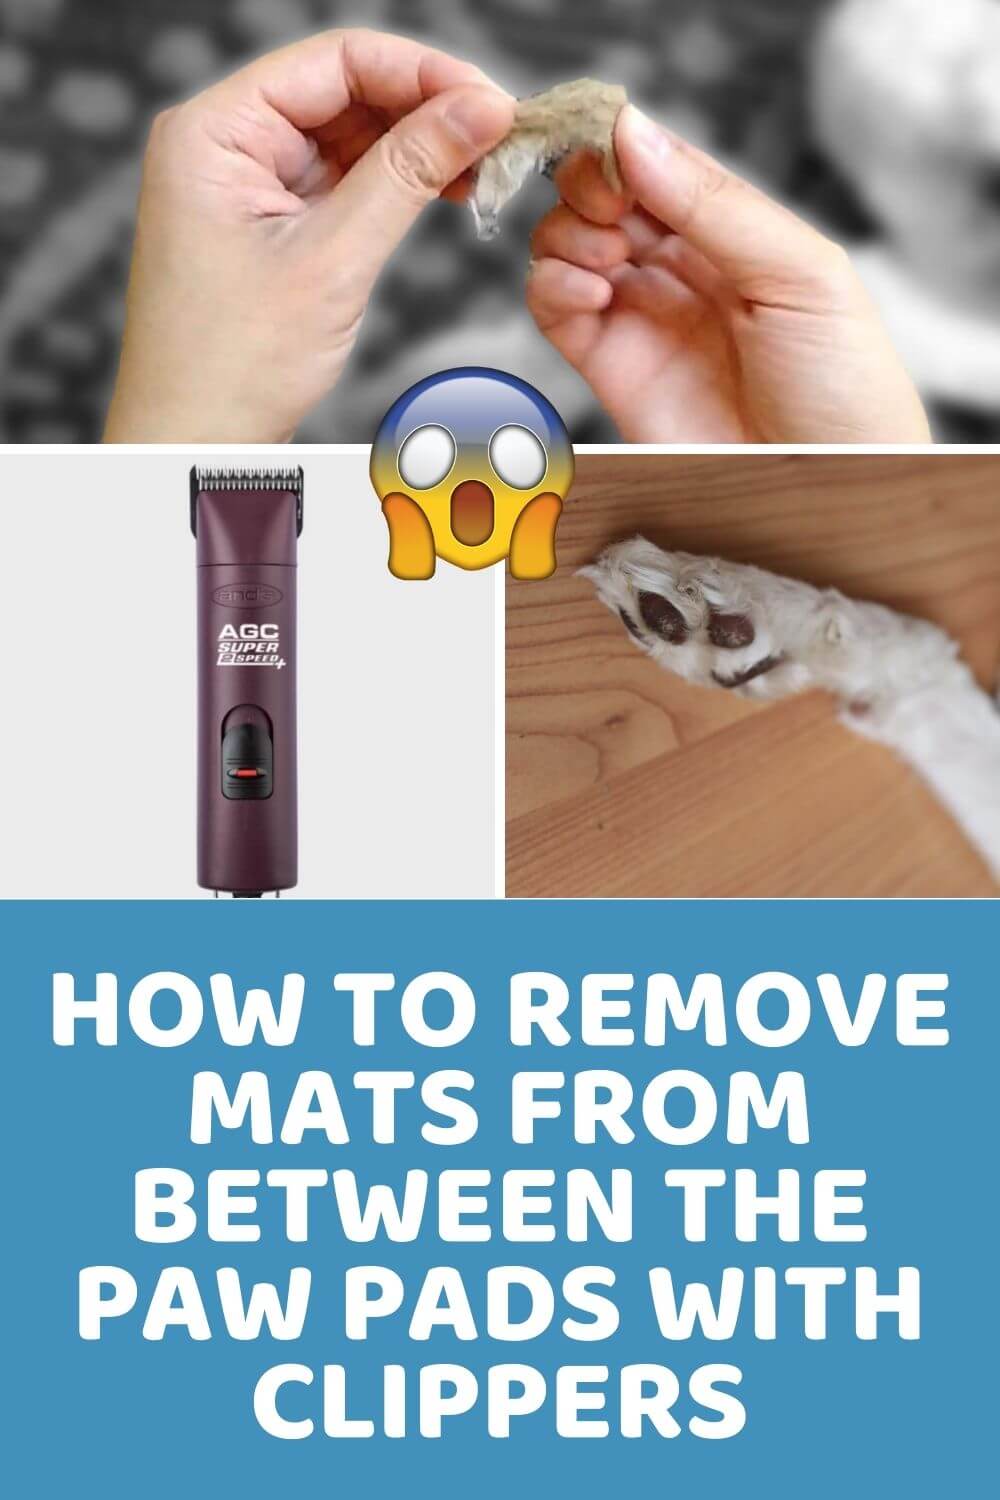 How to Remove Mats From Between the Paw Pads With Clippers